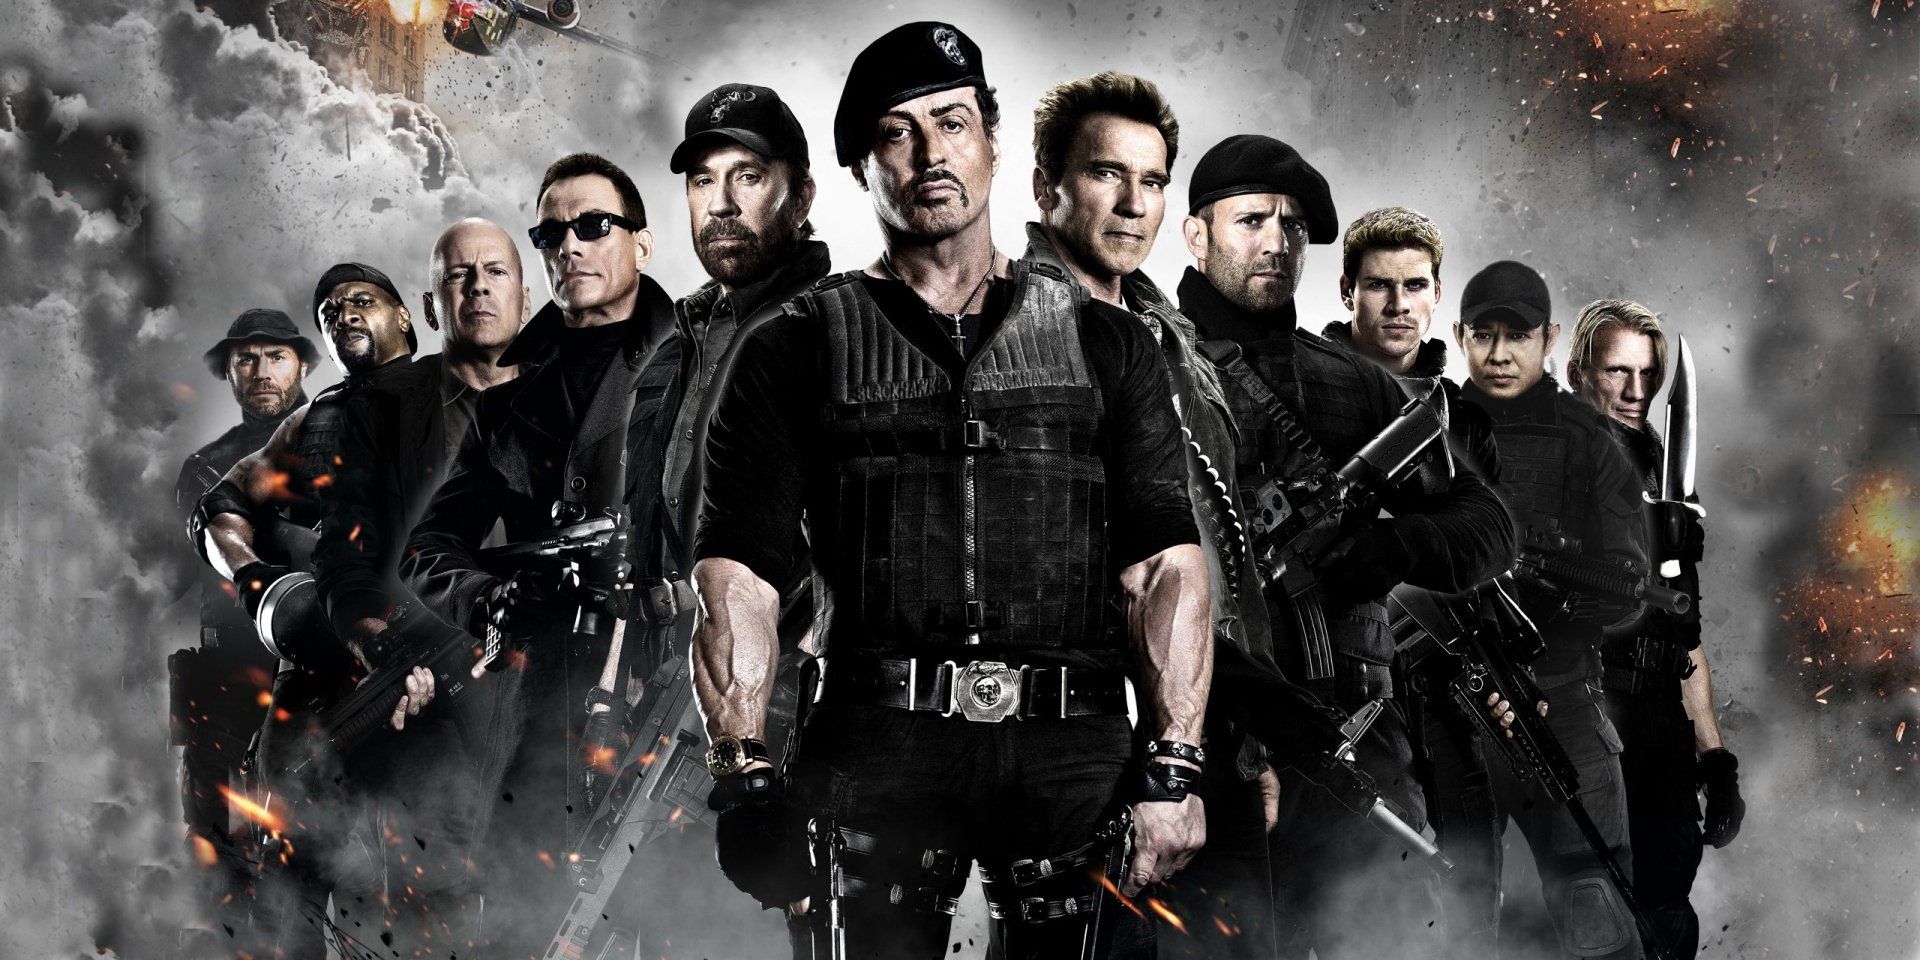 The Expendables Cast